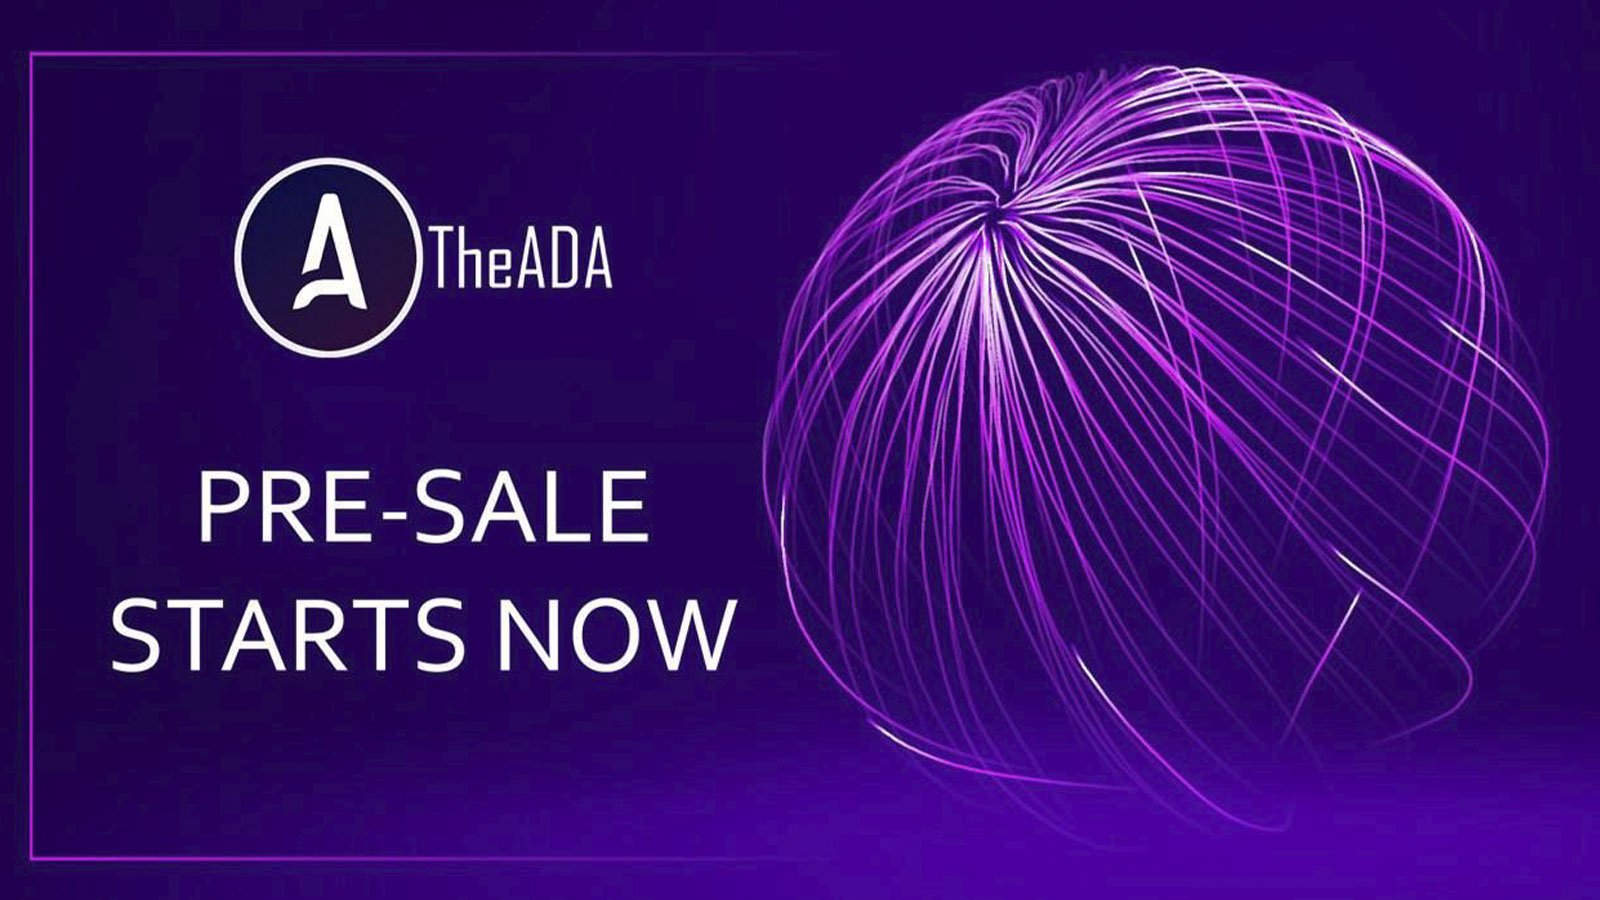 TheADA Presale Starts Now. Limited Spots Available. Buy Before Price Increase